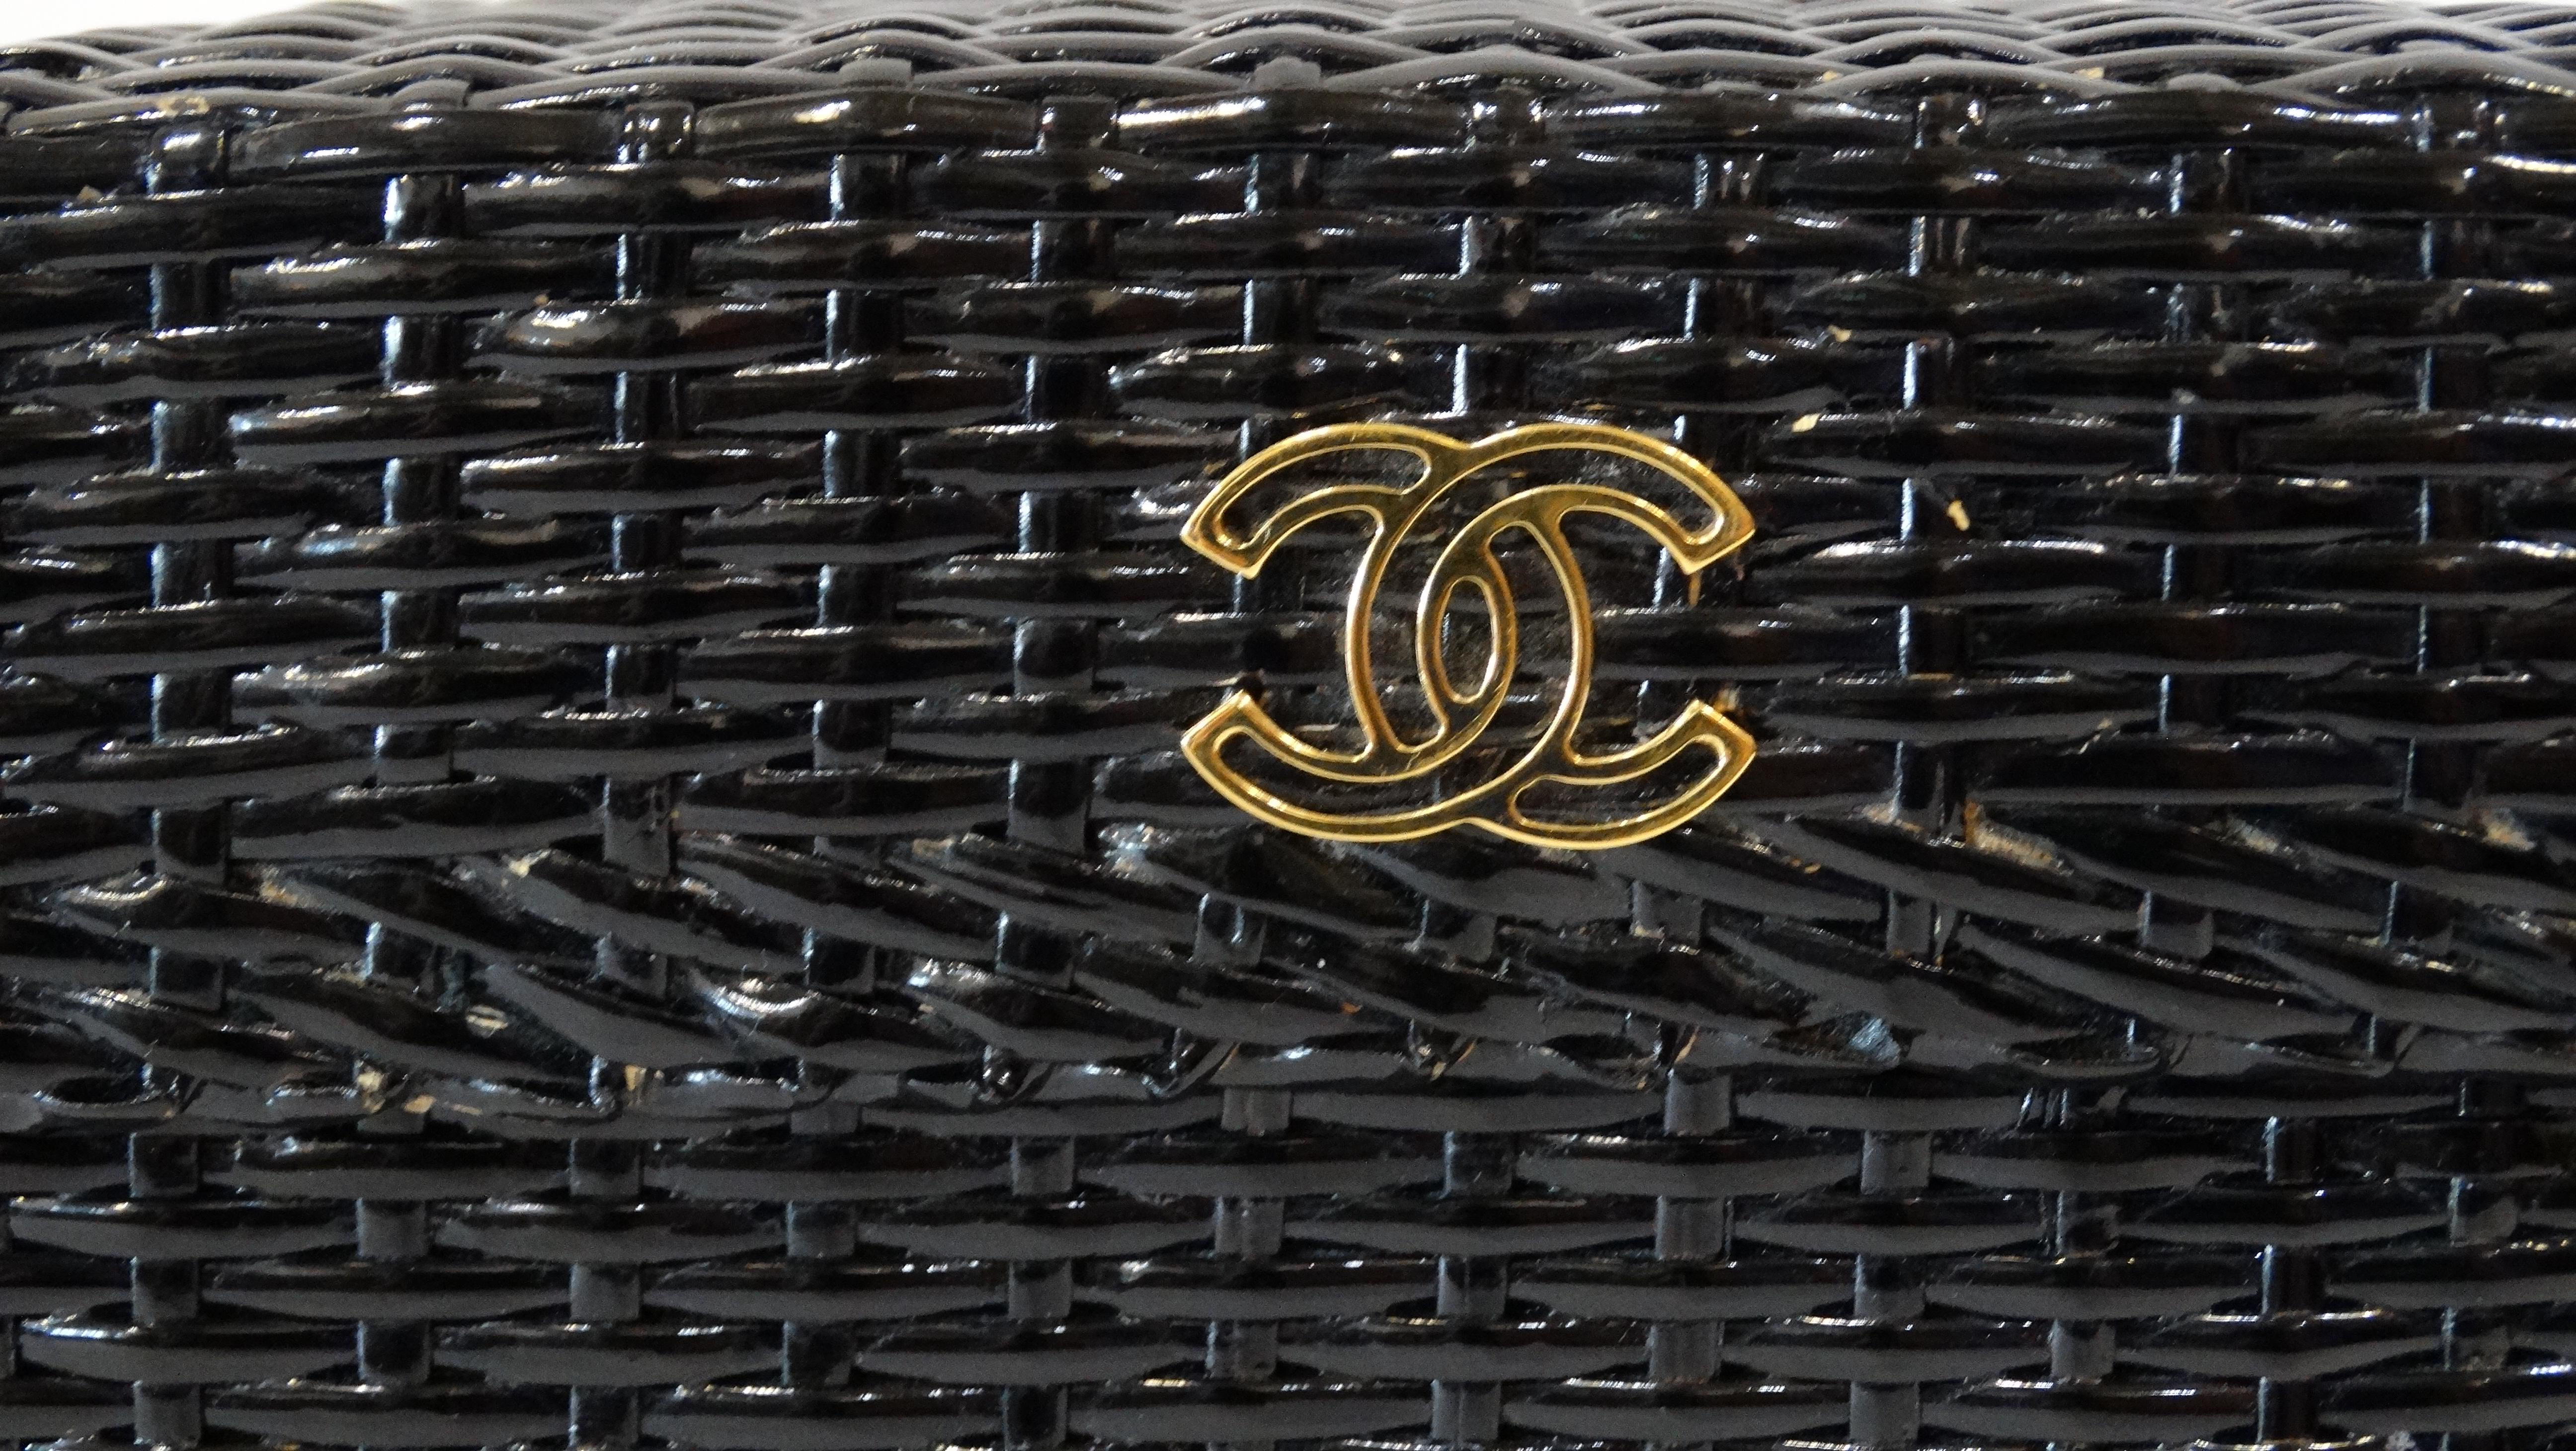 Carry around a piece of vintage history courtesy of Karl Lagerfeld! Circa late 1990s, this rare Chanel bag screams mini picnic basket with its black glazed woven rattan exterior and adorable basket shape. Features gold plated hardware, long